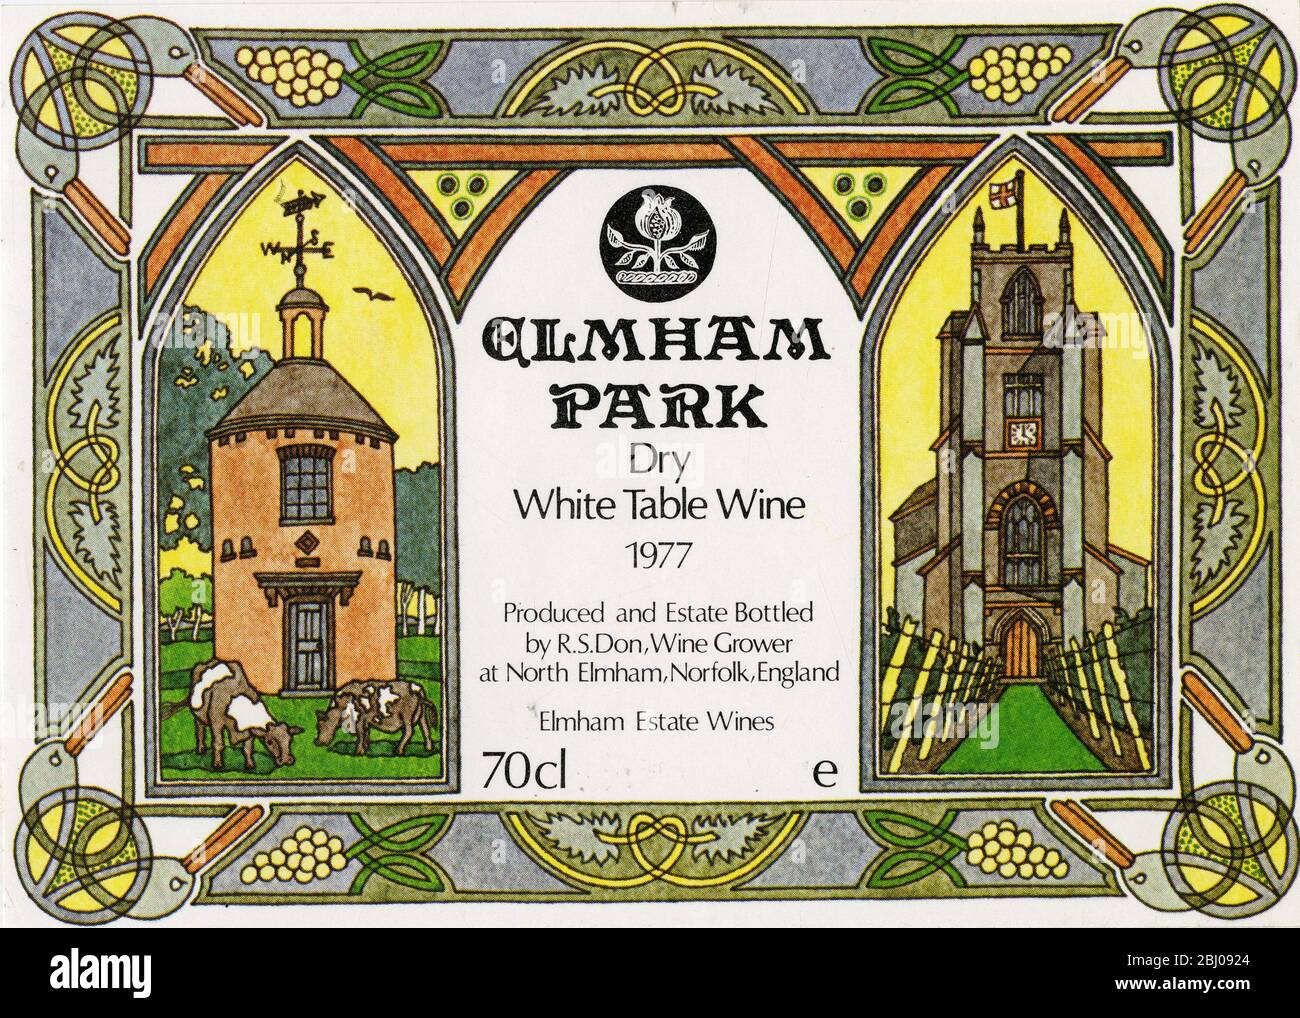 Wine Label. - Clmham Park. Dry White Table Wine. 1977. Produced and Estate Bottled by R.S Don, Wine Grower at North Elmsham, Norfolk, England. Elmham Estate Wines. 70cl. - Stock Photo